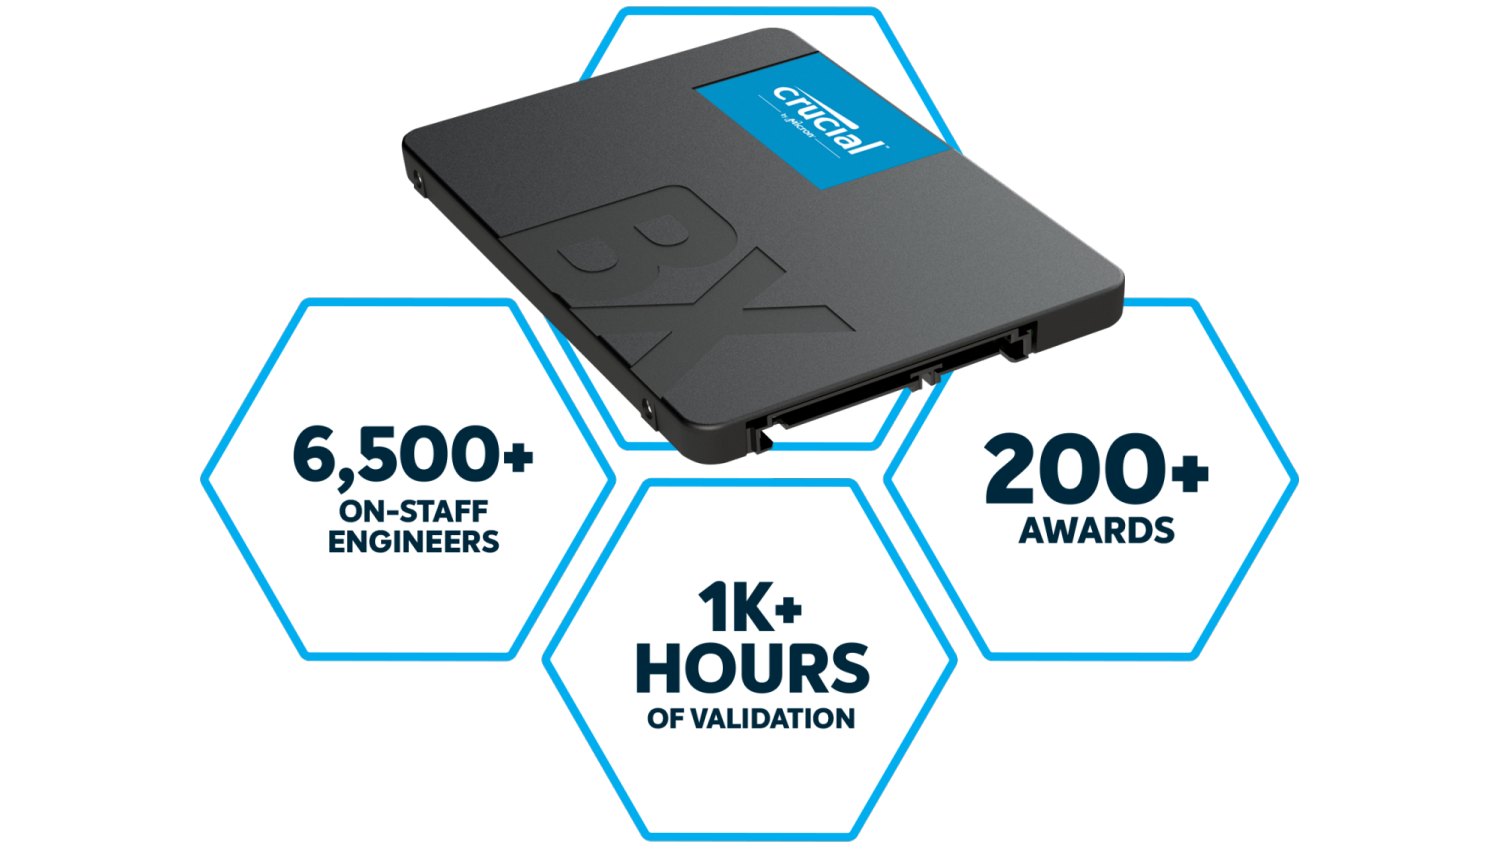 Crucial® BX500 SSD - Micron quality. A heritage of award winning SSD's.